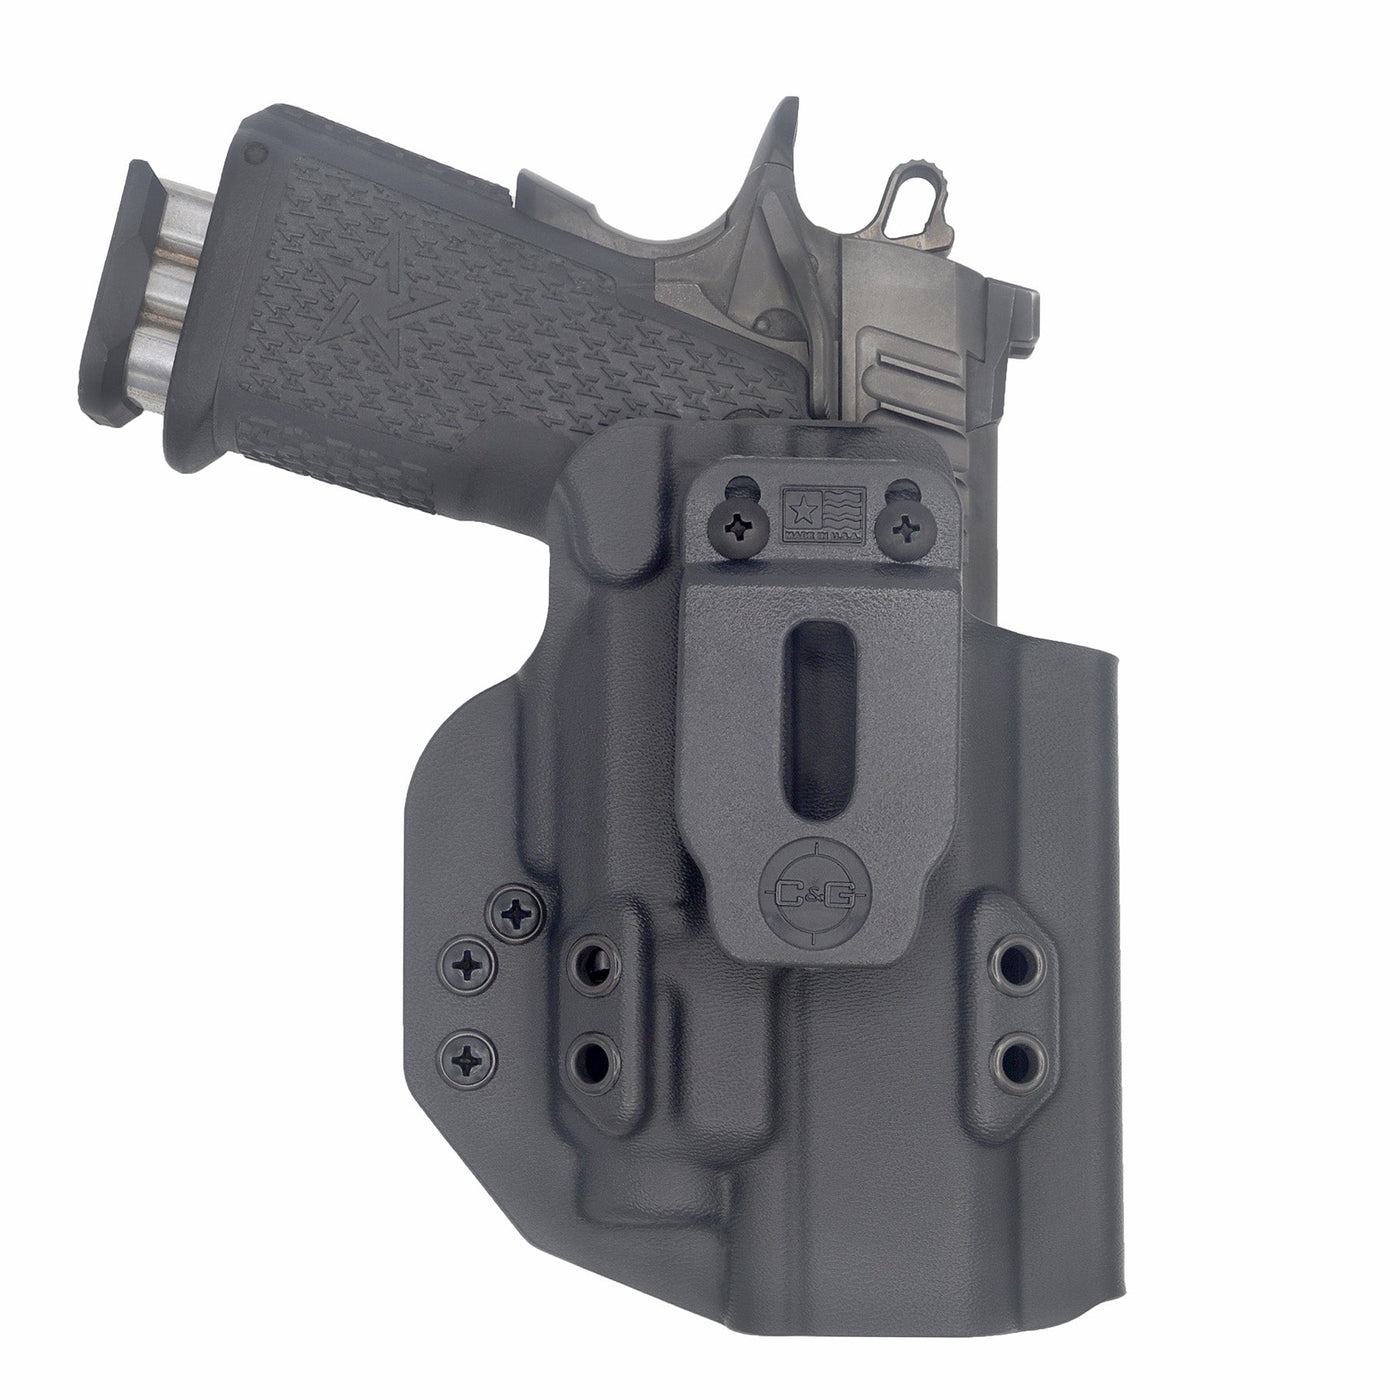 C&G Holsters Quickship IWB Tactical 1911 DS Prodigy Streamlight TLR7/a in holstered position